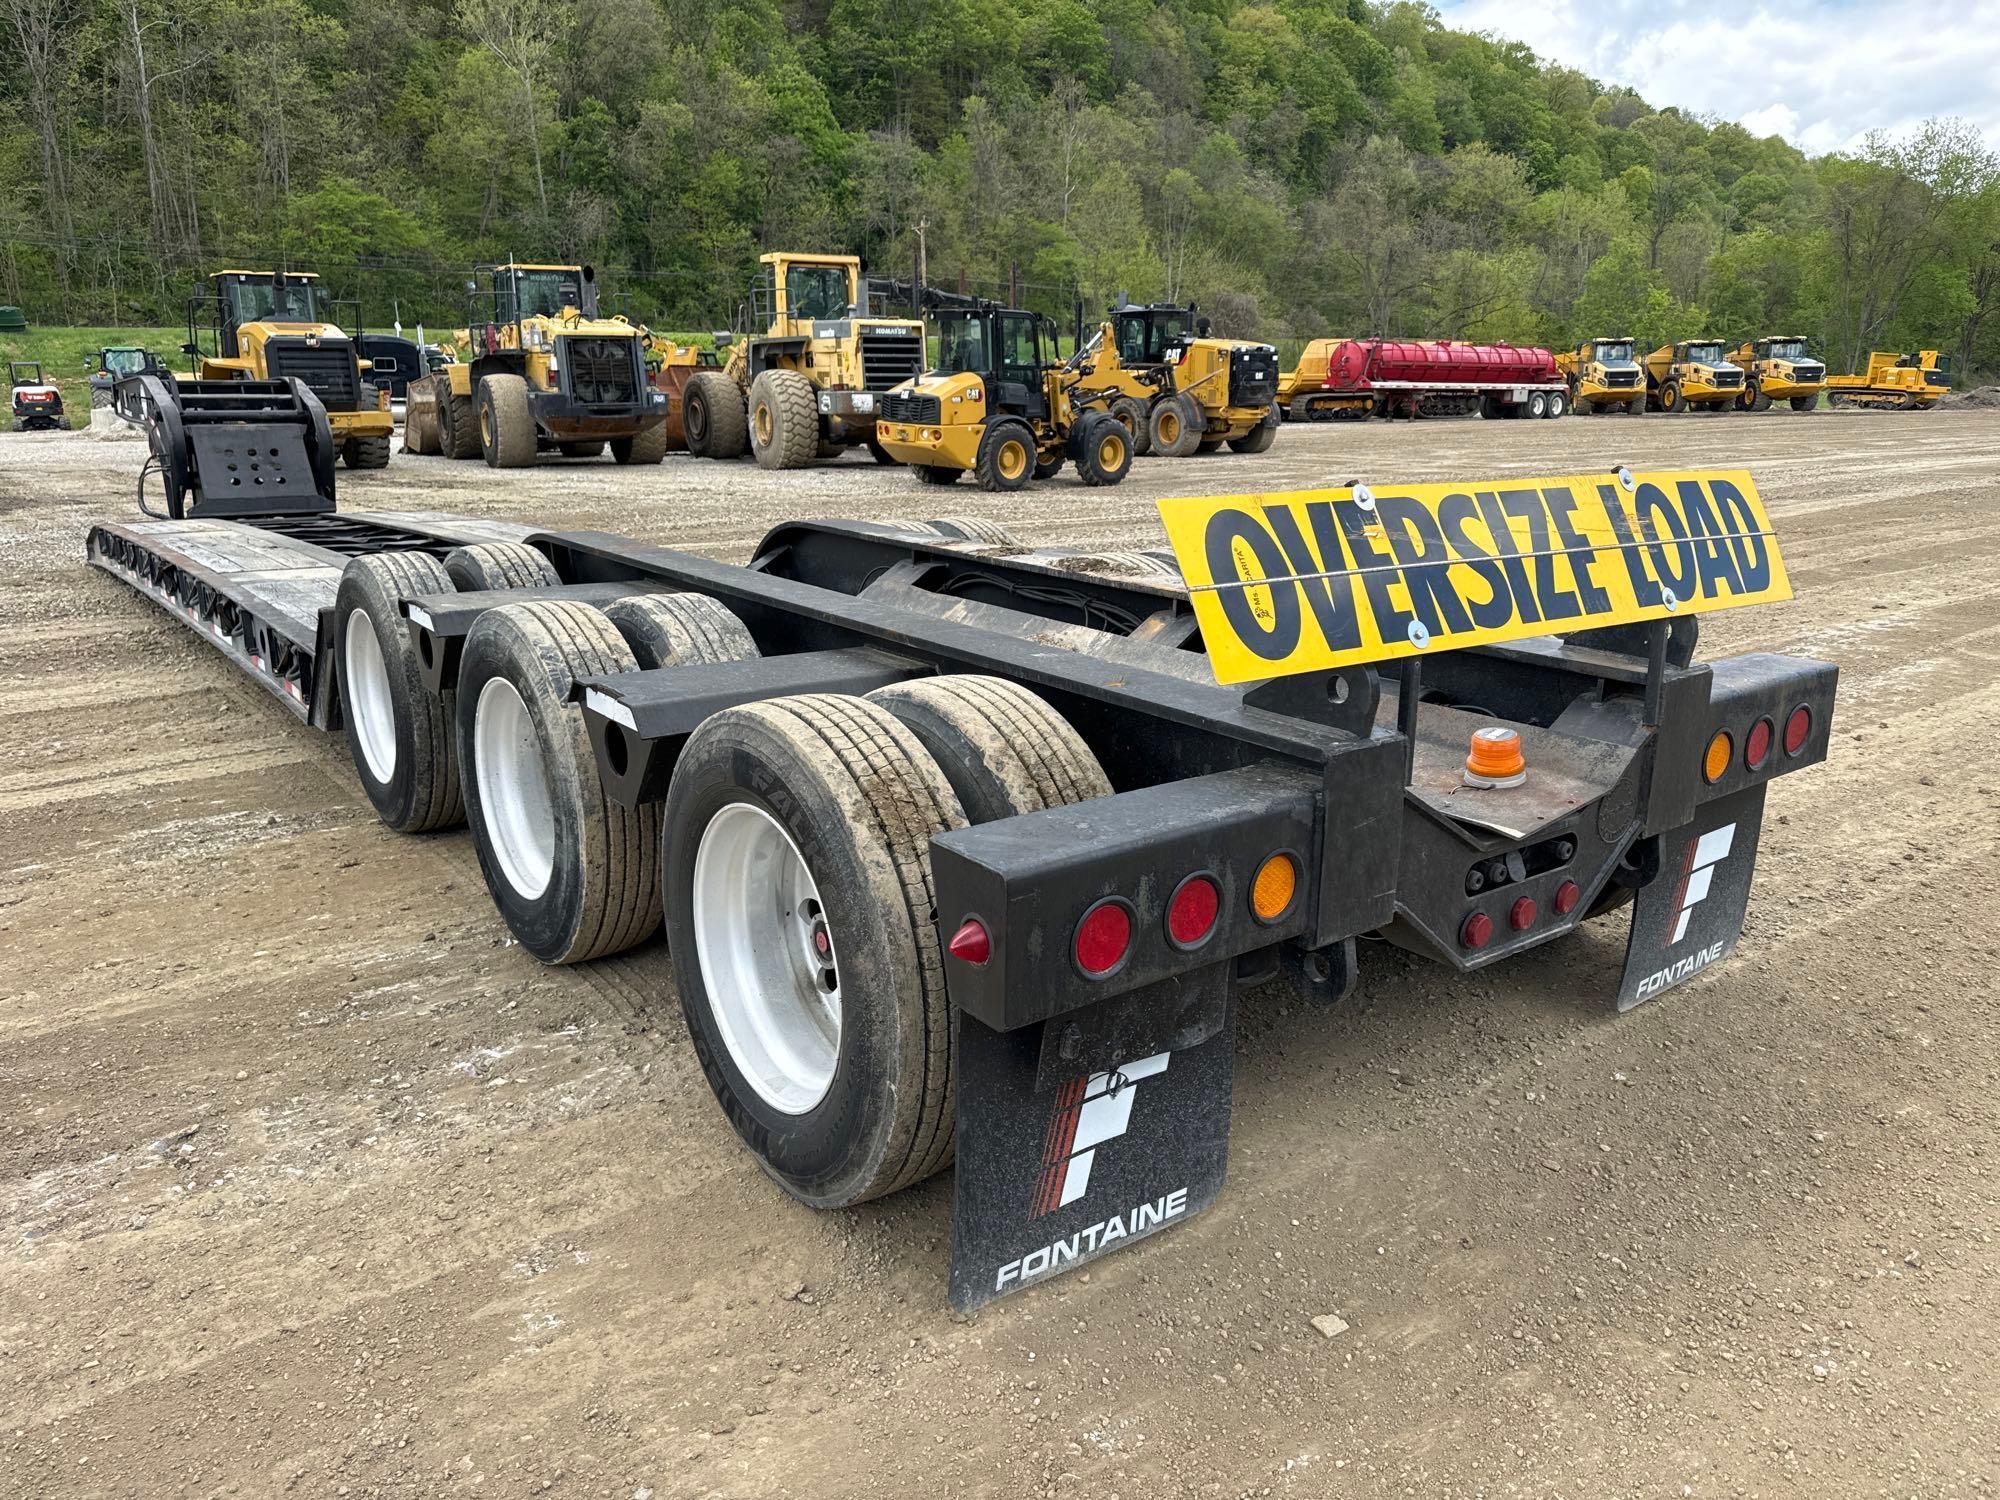 2004 FONTAINE 553-1A DETACHABLE GOOSENECK TRAILER VN:4LFF5430X43525068 equipped with 55 ton